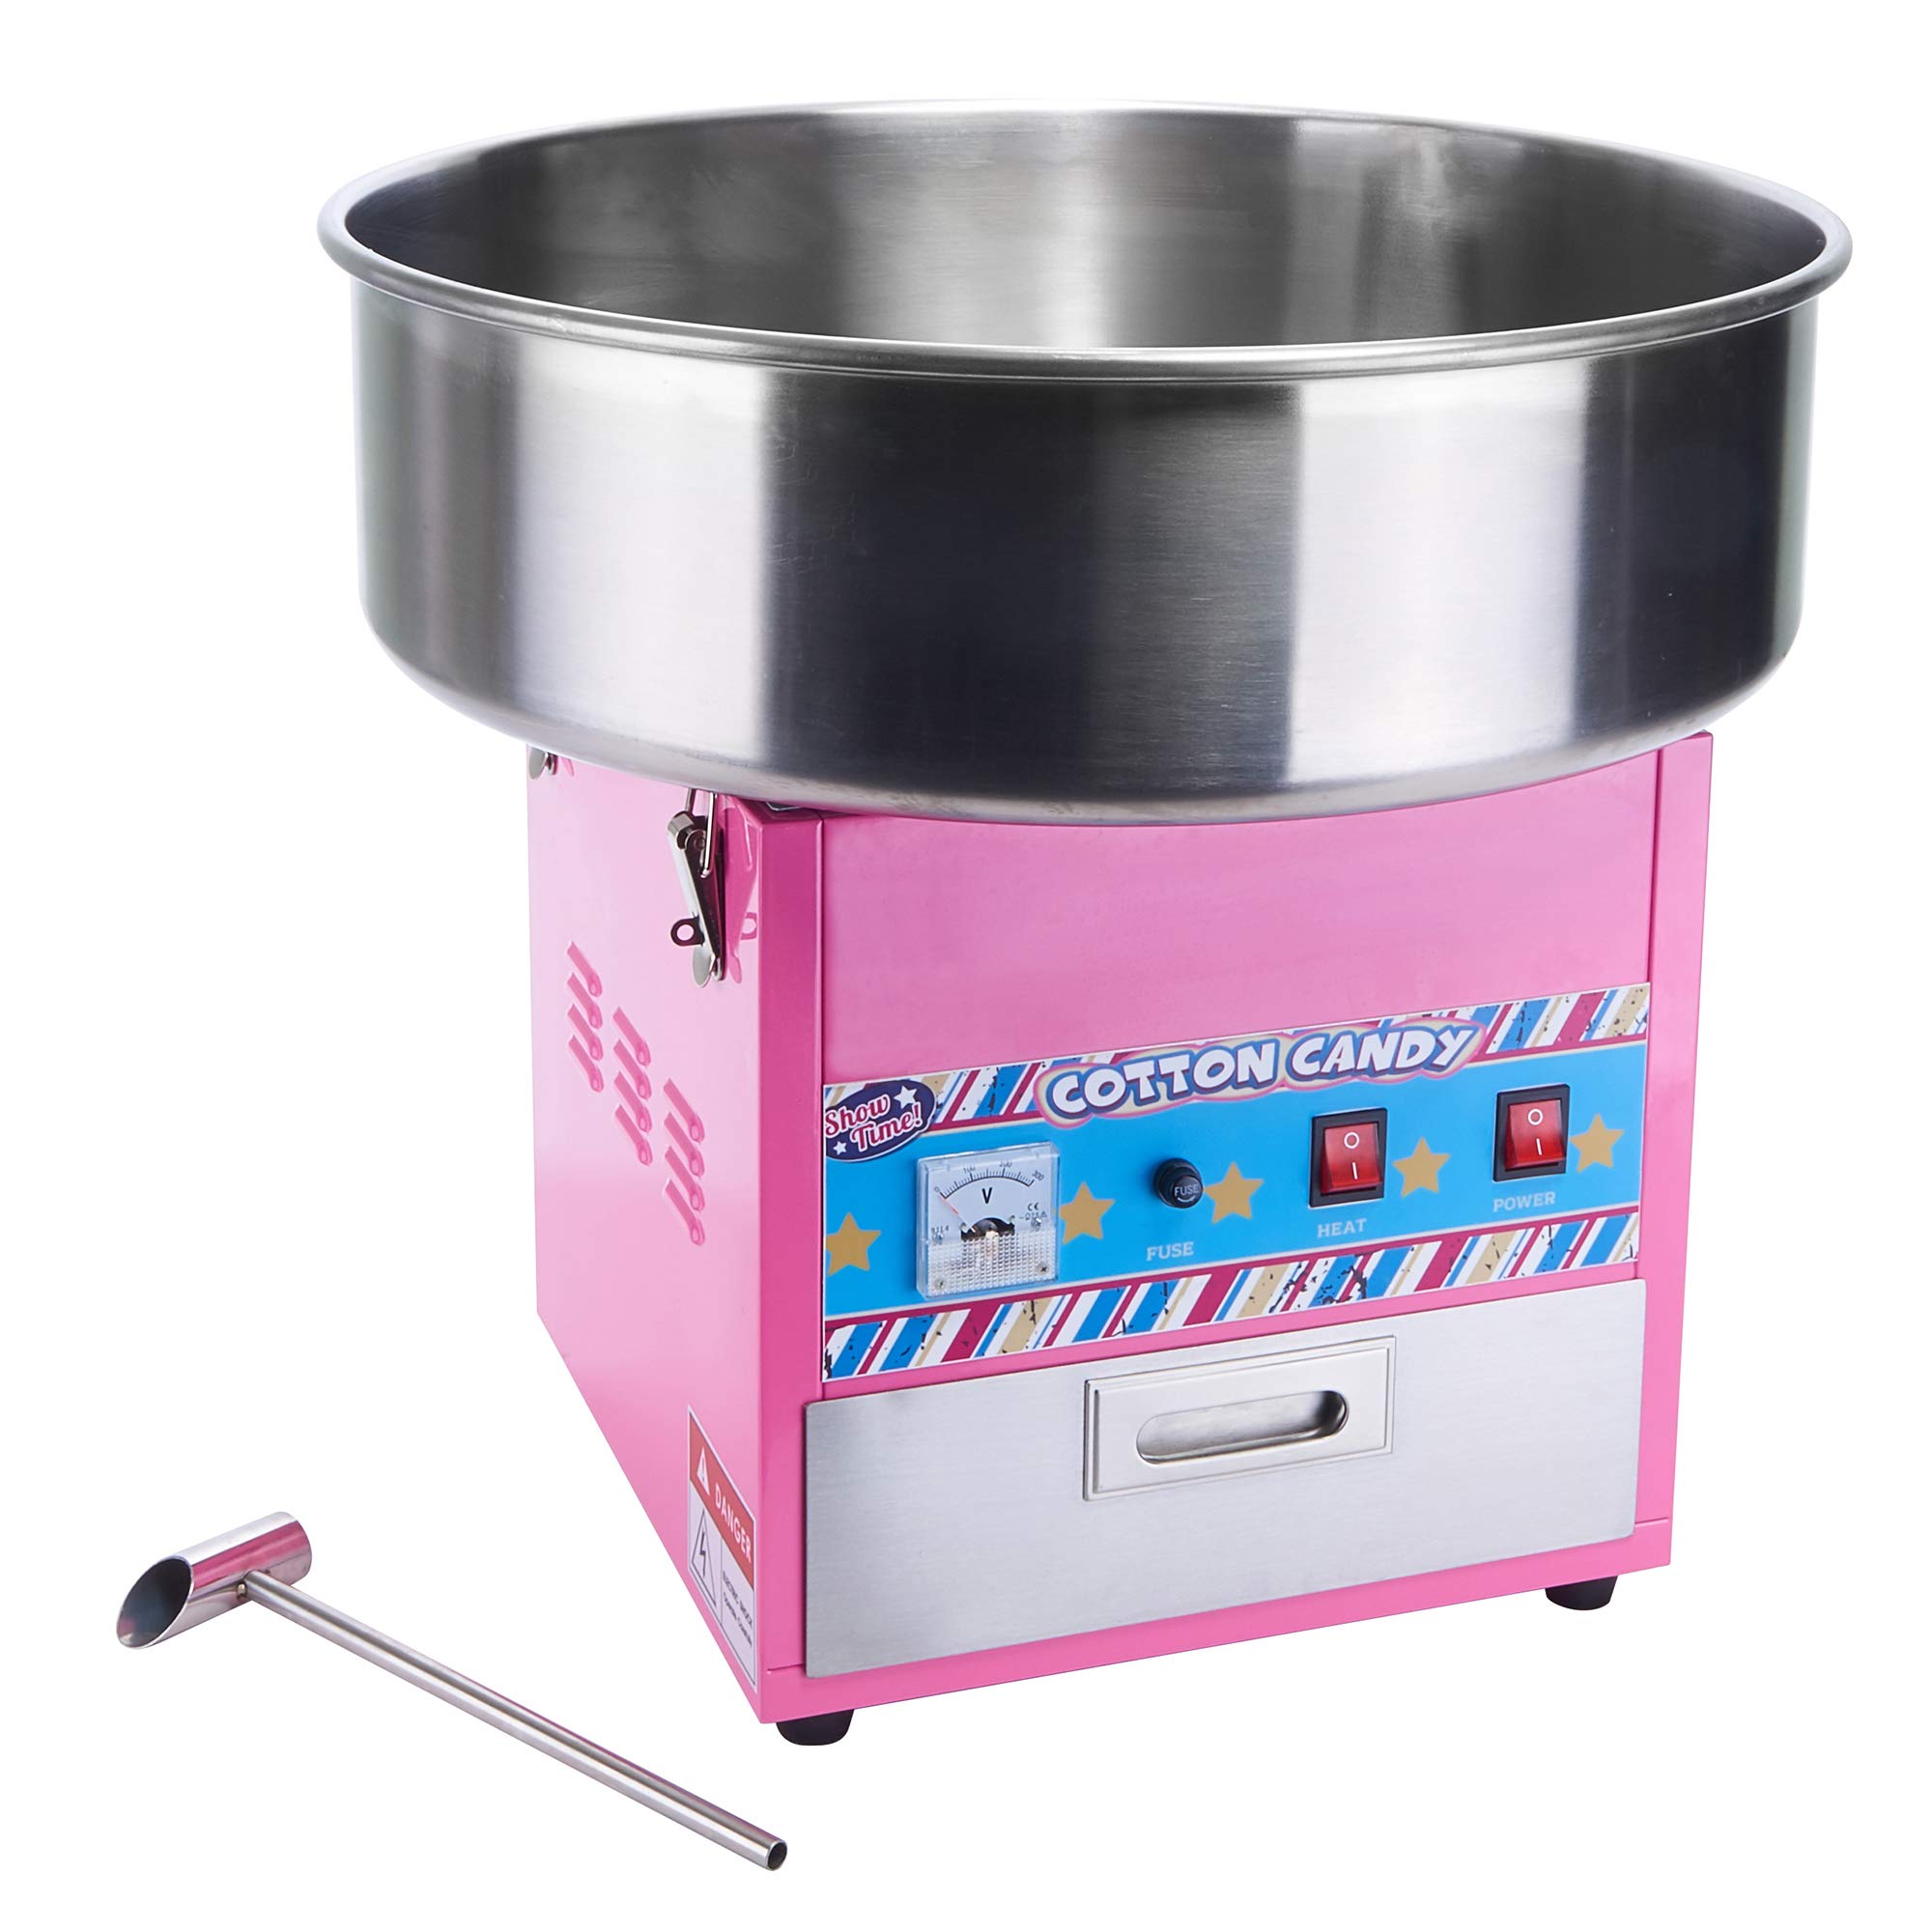 Winco CCM-28, Show Time Electric Cotton Candy Machine With 20.5'' Stainless Steel Bowl, 1080W, Cotton Candy Maker